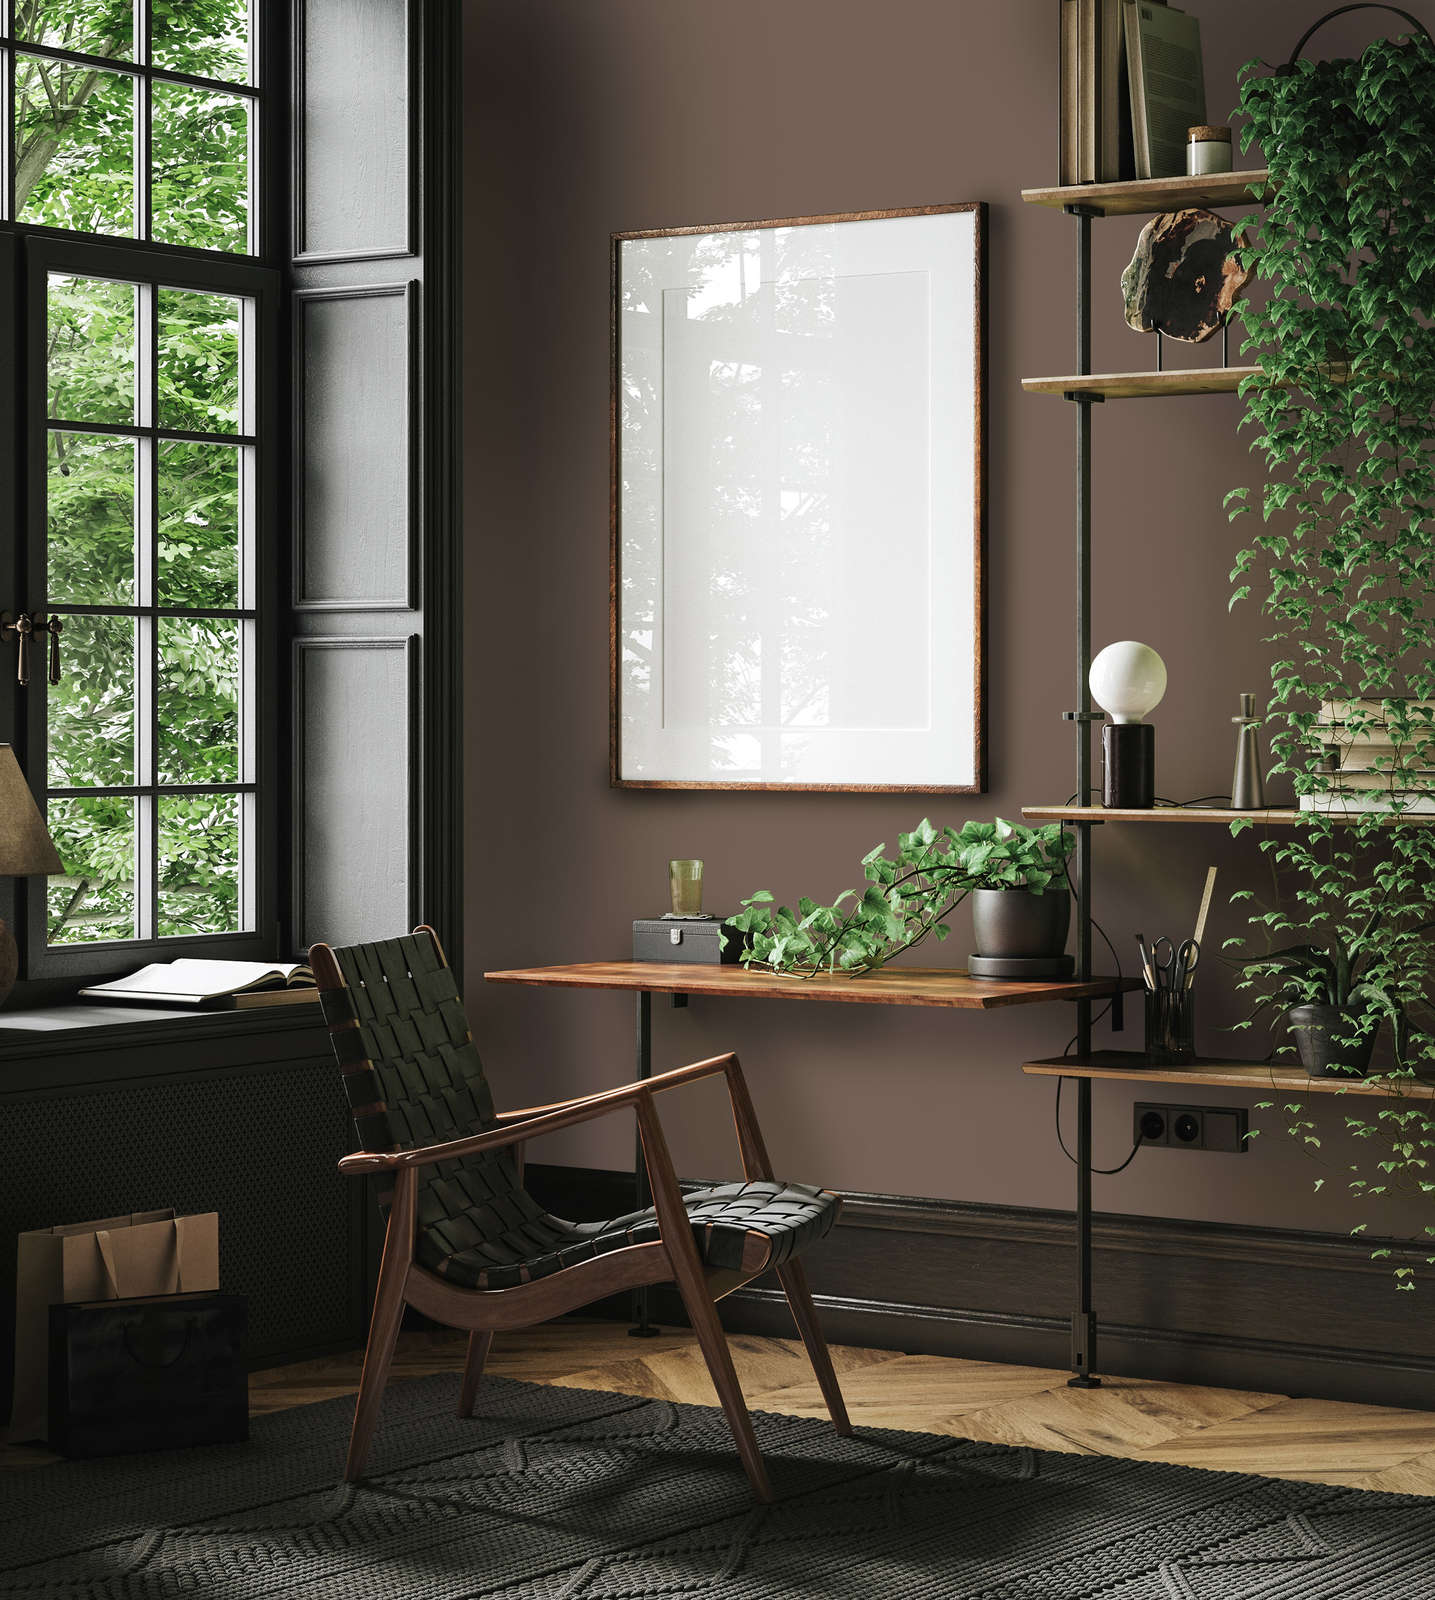             Premium Wall Paint down-to-earth maroon »Modern Mud« NW721 – 2.5 litre
        